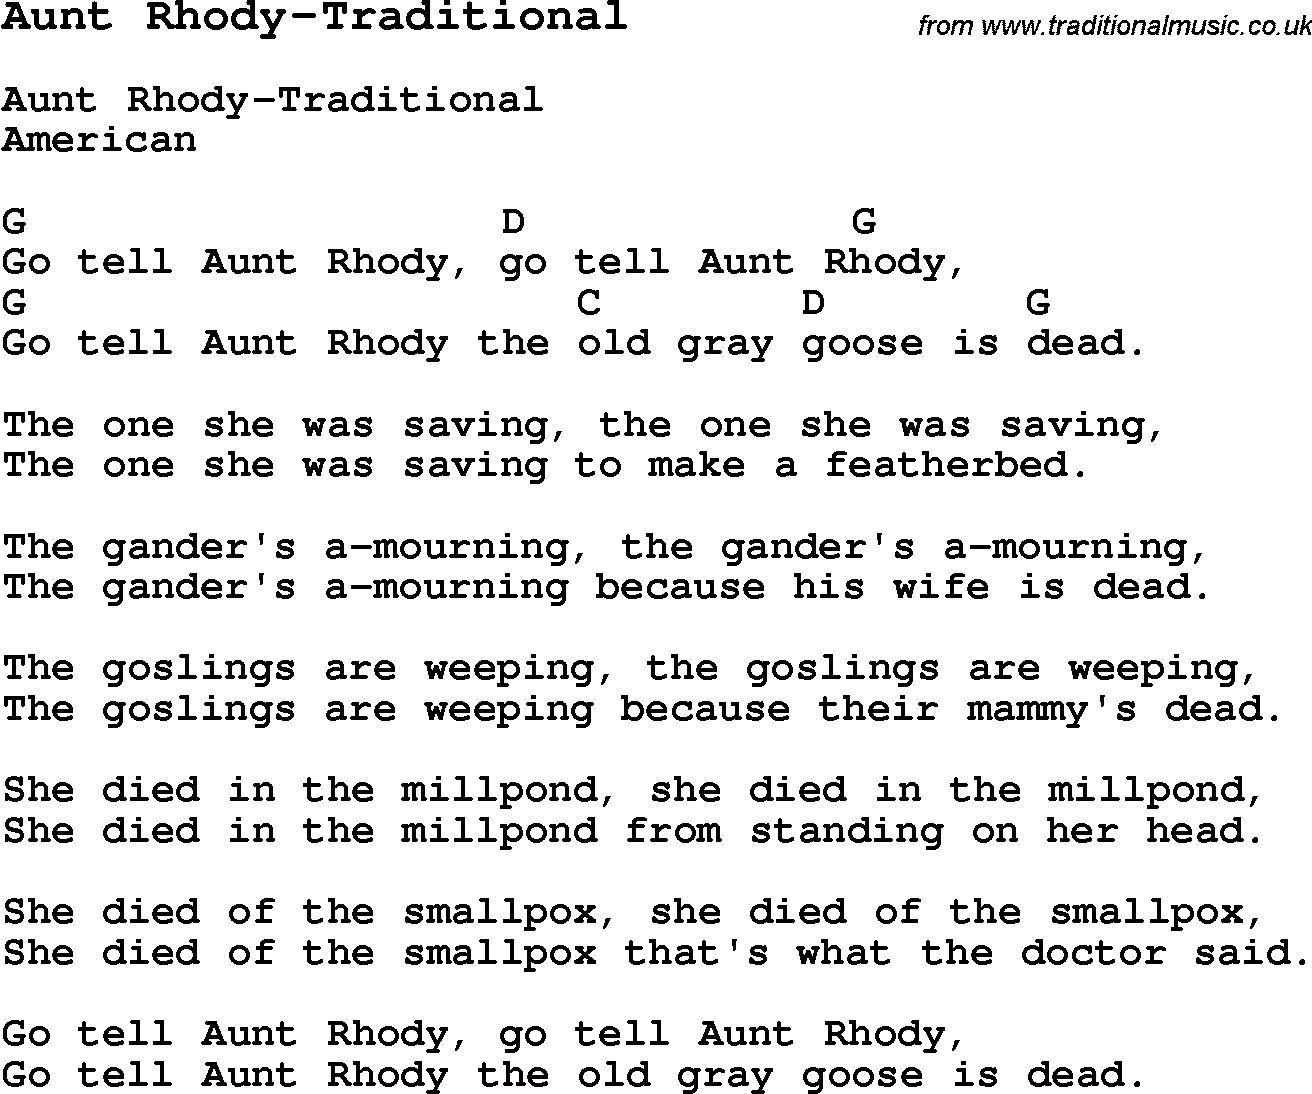 Summer-Camp Song, Aunt Rhody-Traditional, with lyrics and chords for Ukulele, Guitar Banjo etc.